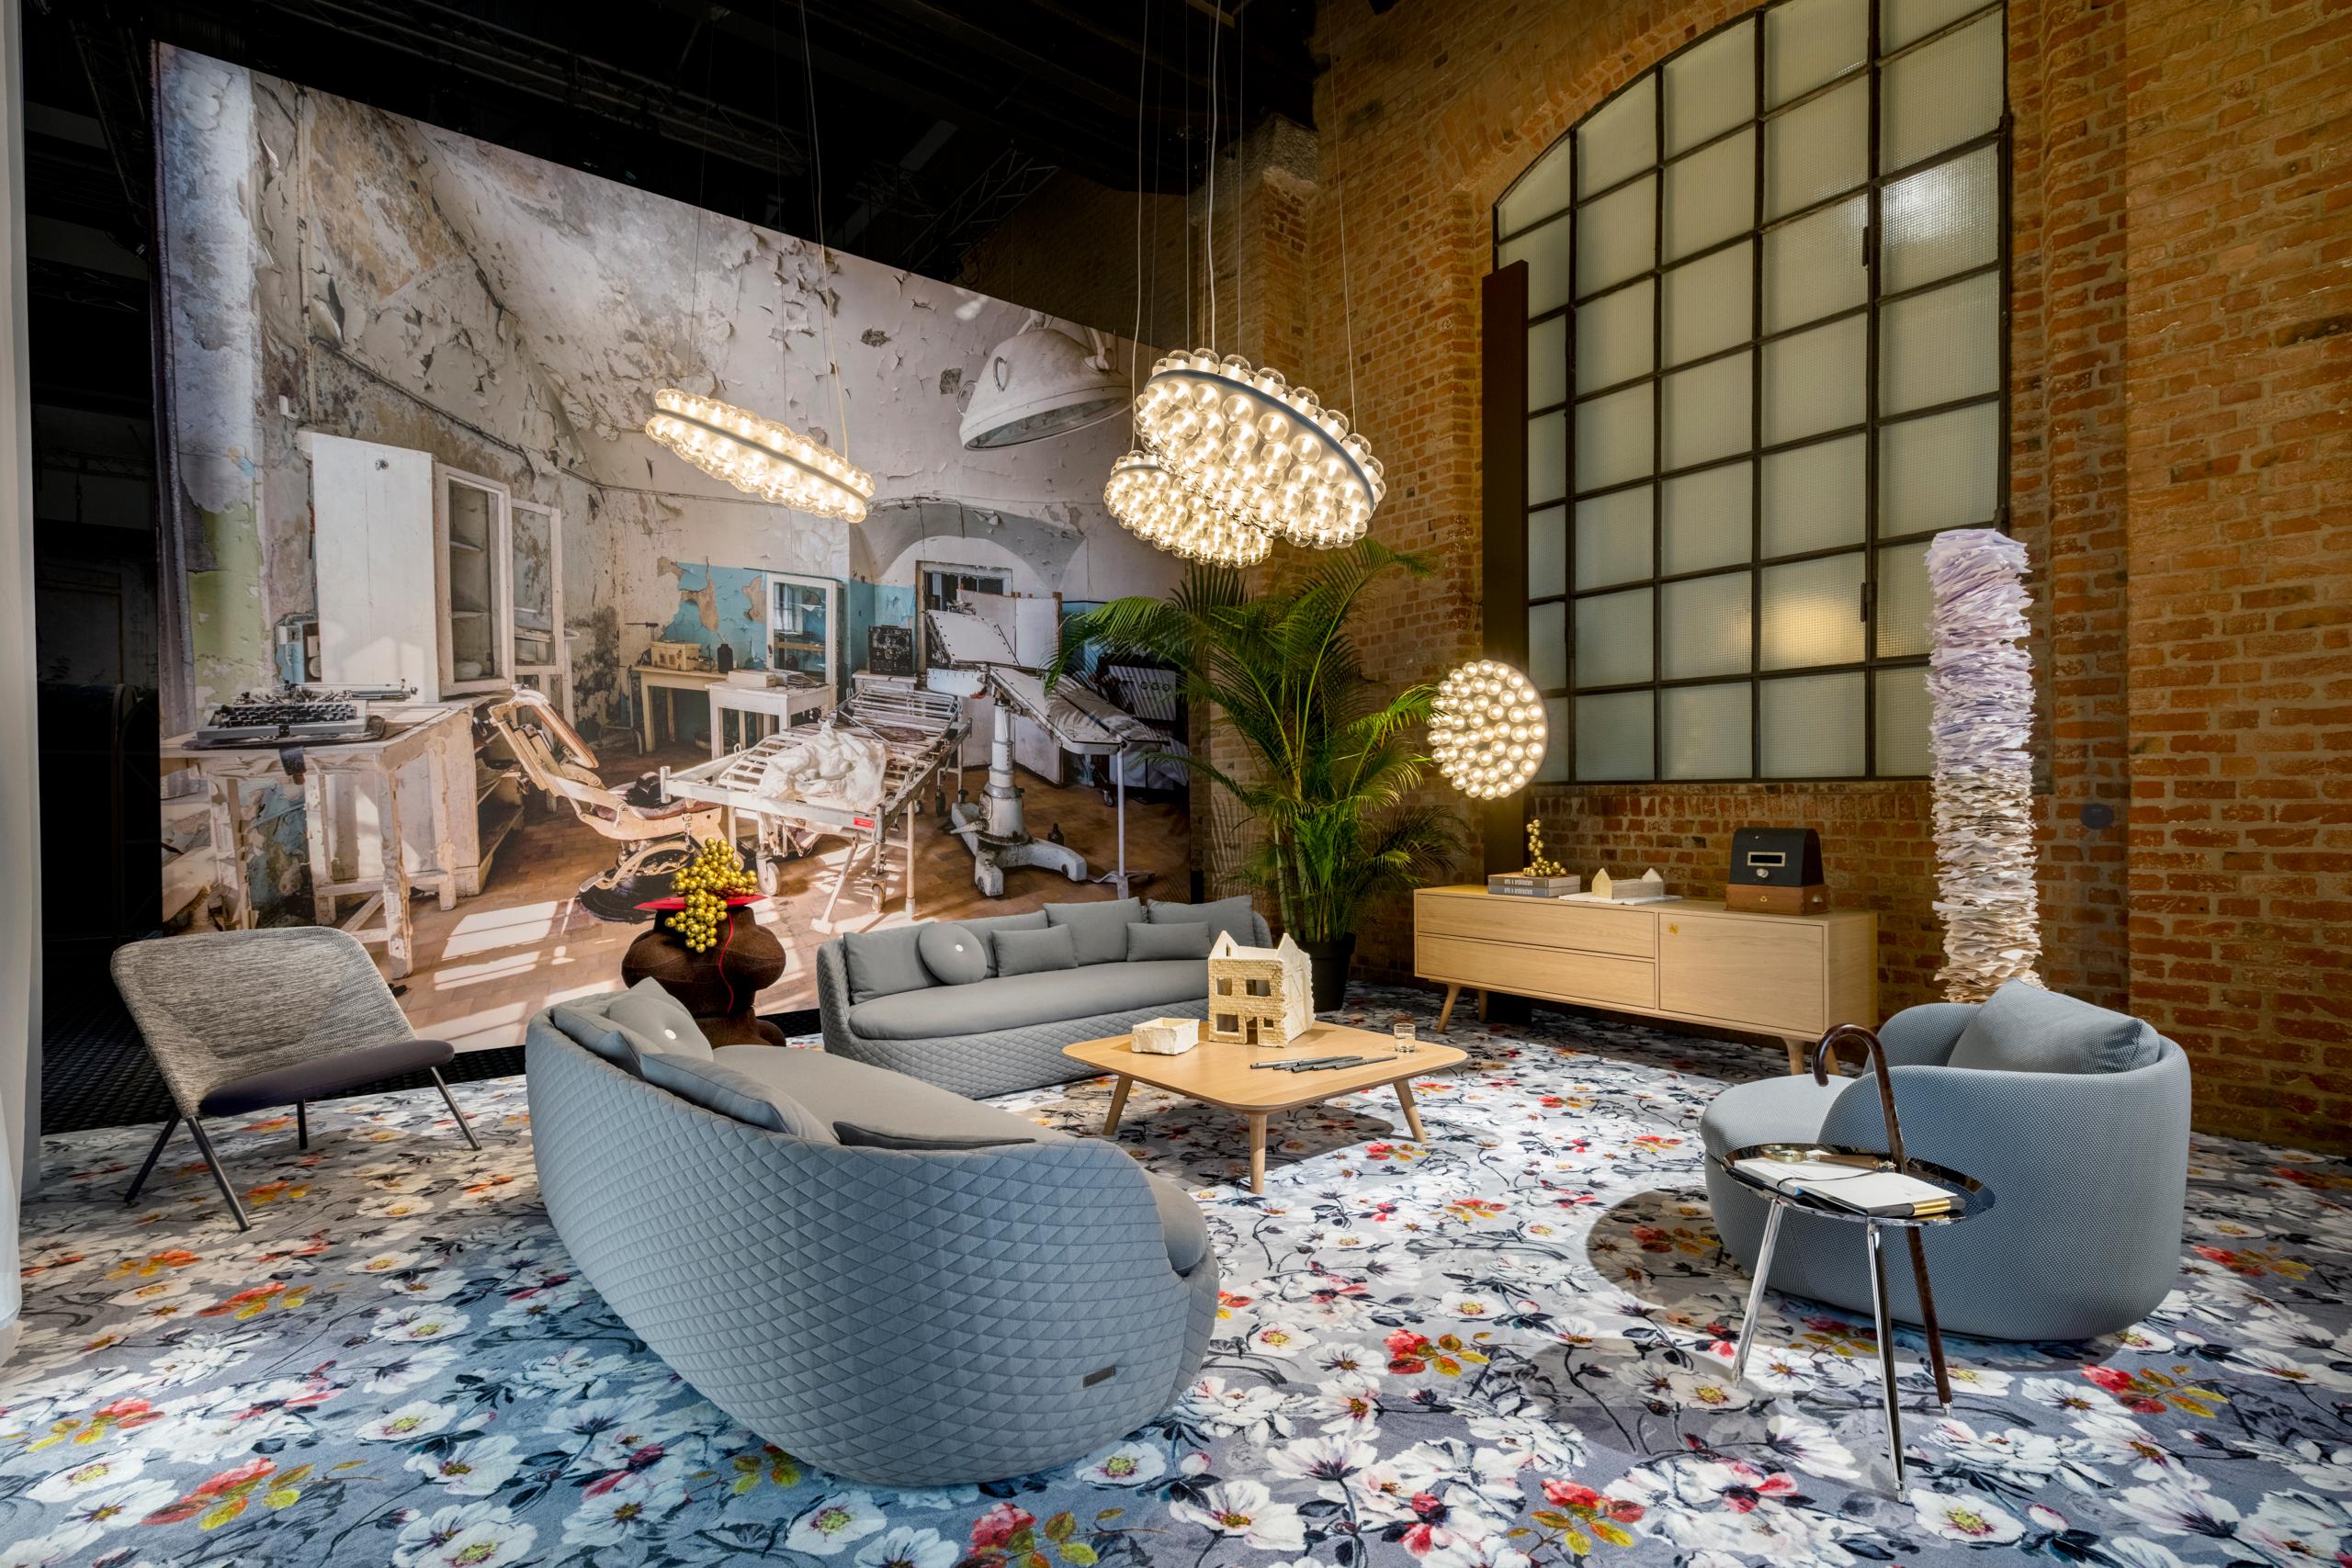 Moooi Pomander Noir Rug in Soft Yarn Polyamide by Tricia Guild

Tricia Guild O.B.E is the creative force of Designers Guild and has been at the forefront of interior design since starting the company in the early 70’s. Internationally renowned for